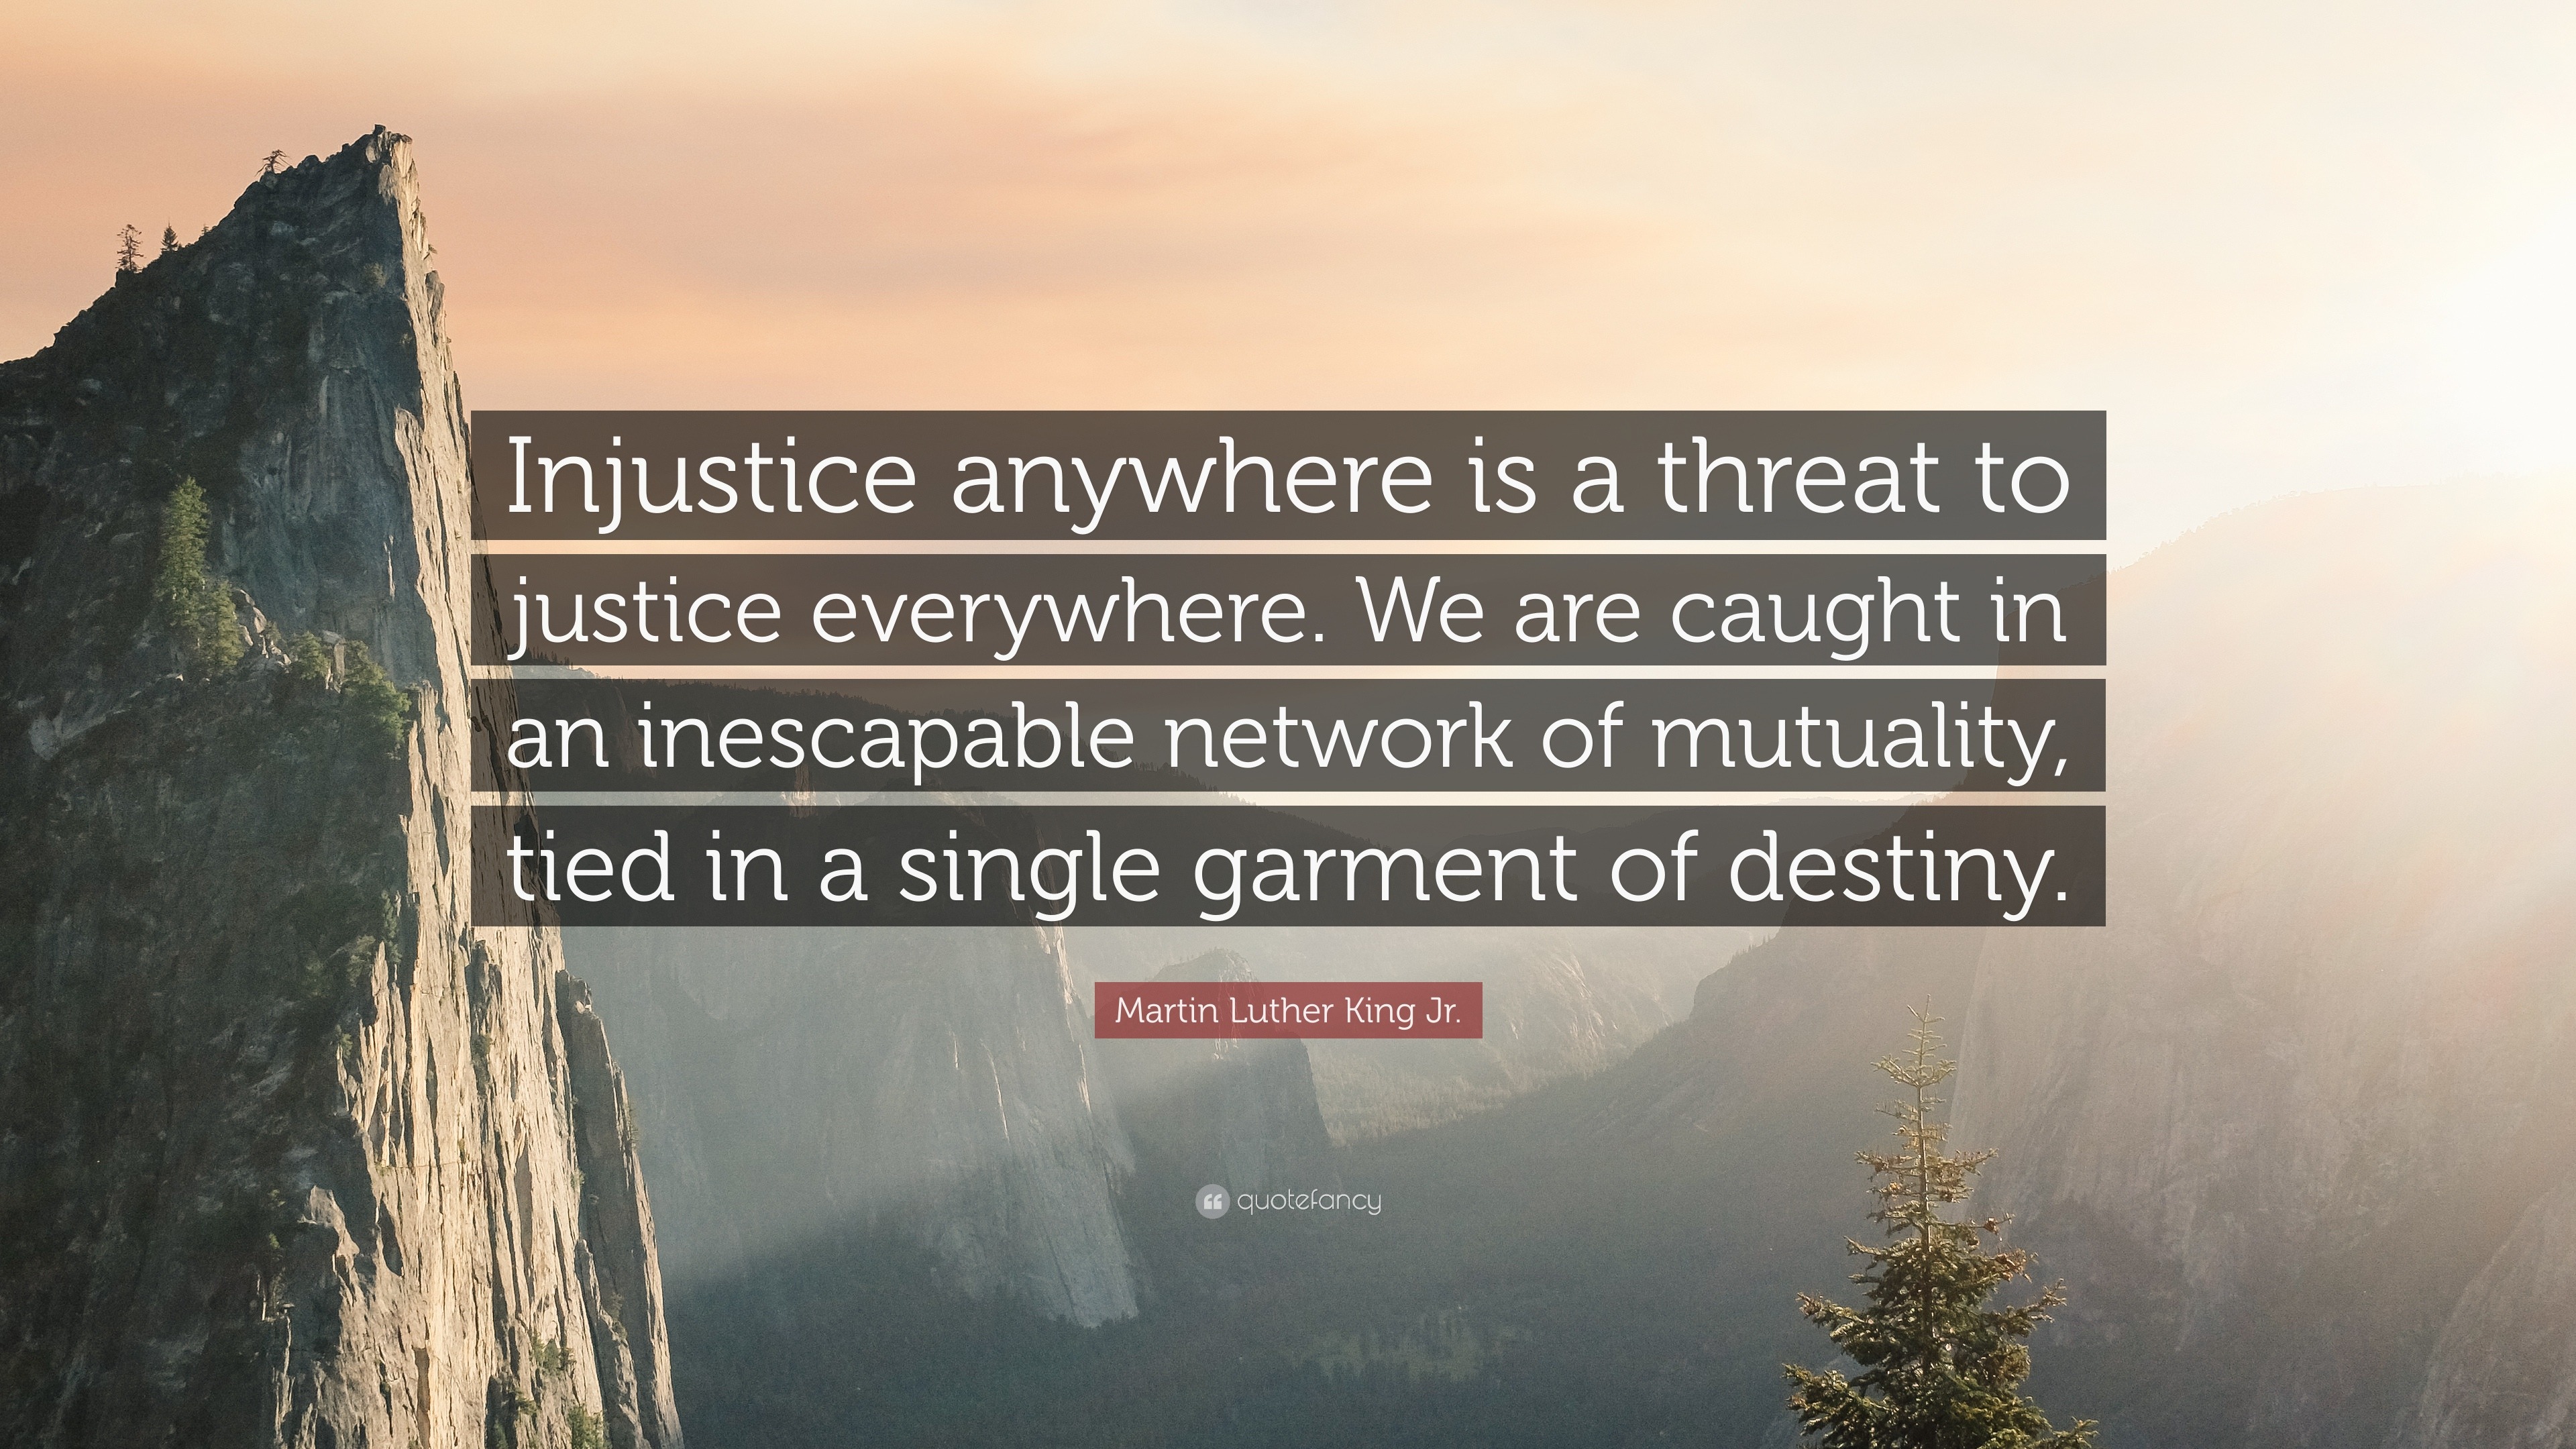 injustice anywhere is a threat to justice everywhere essay upsc